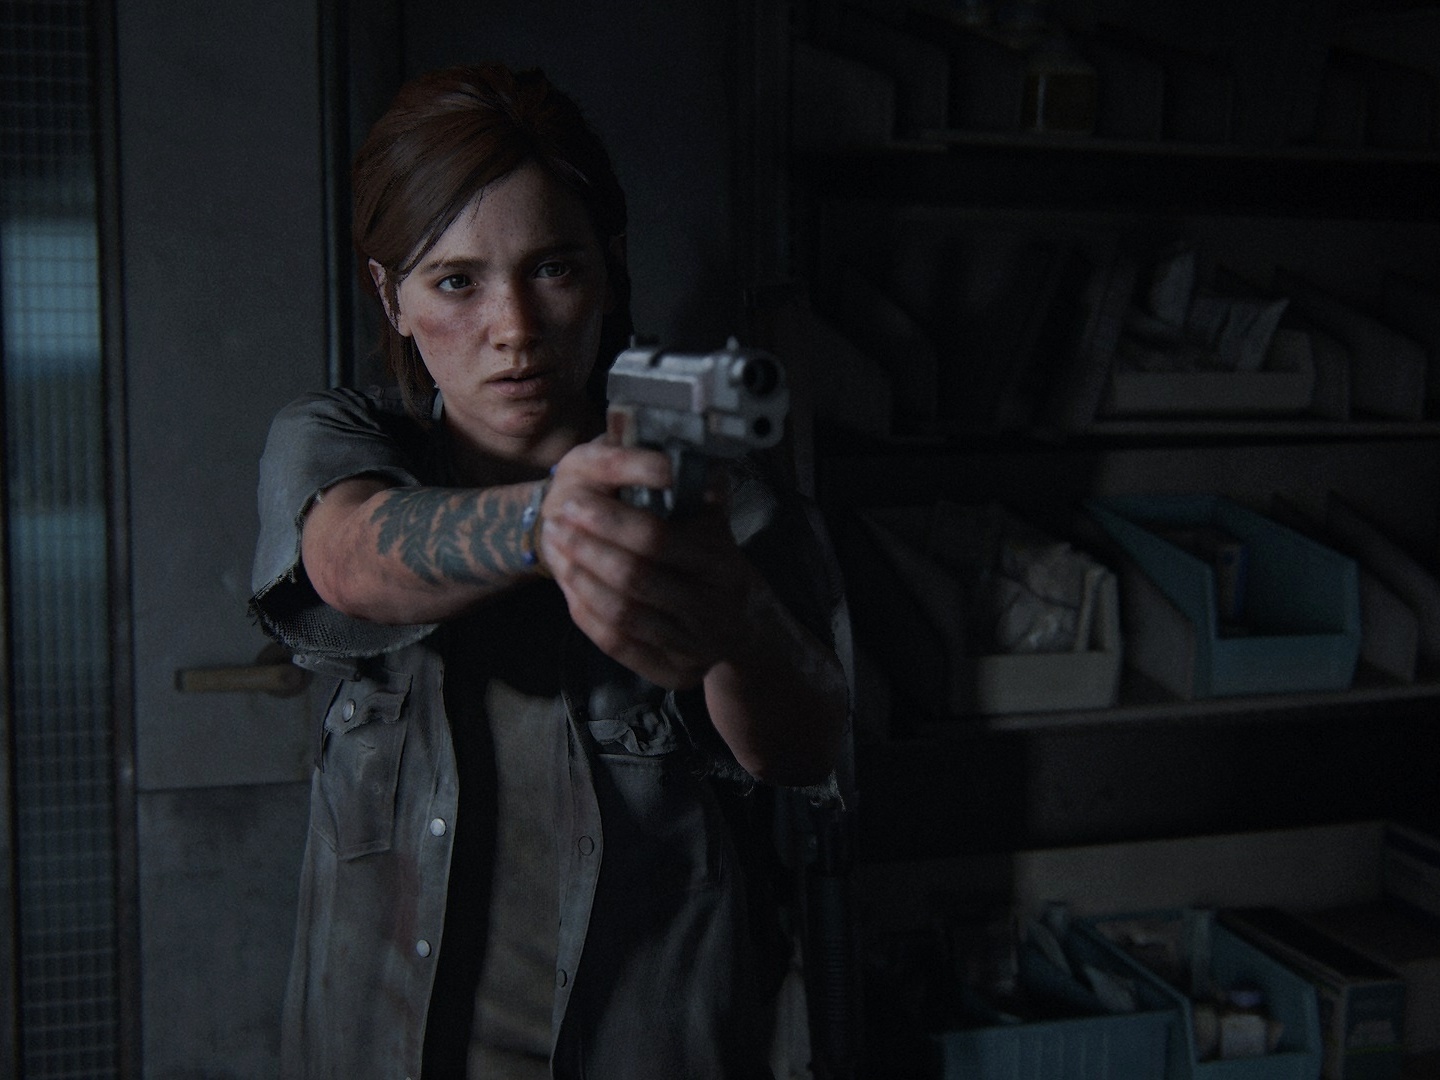 Game The Last Of Us Part II - PS4 na Americanas Empresas